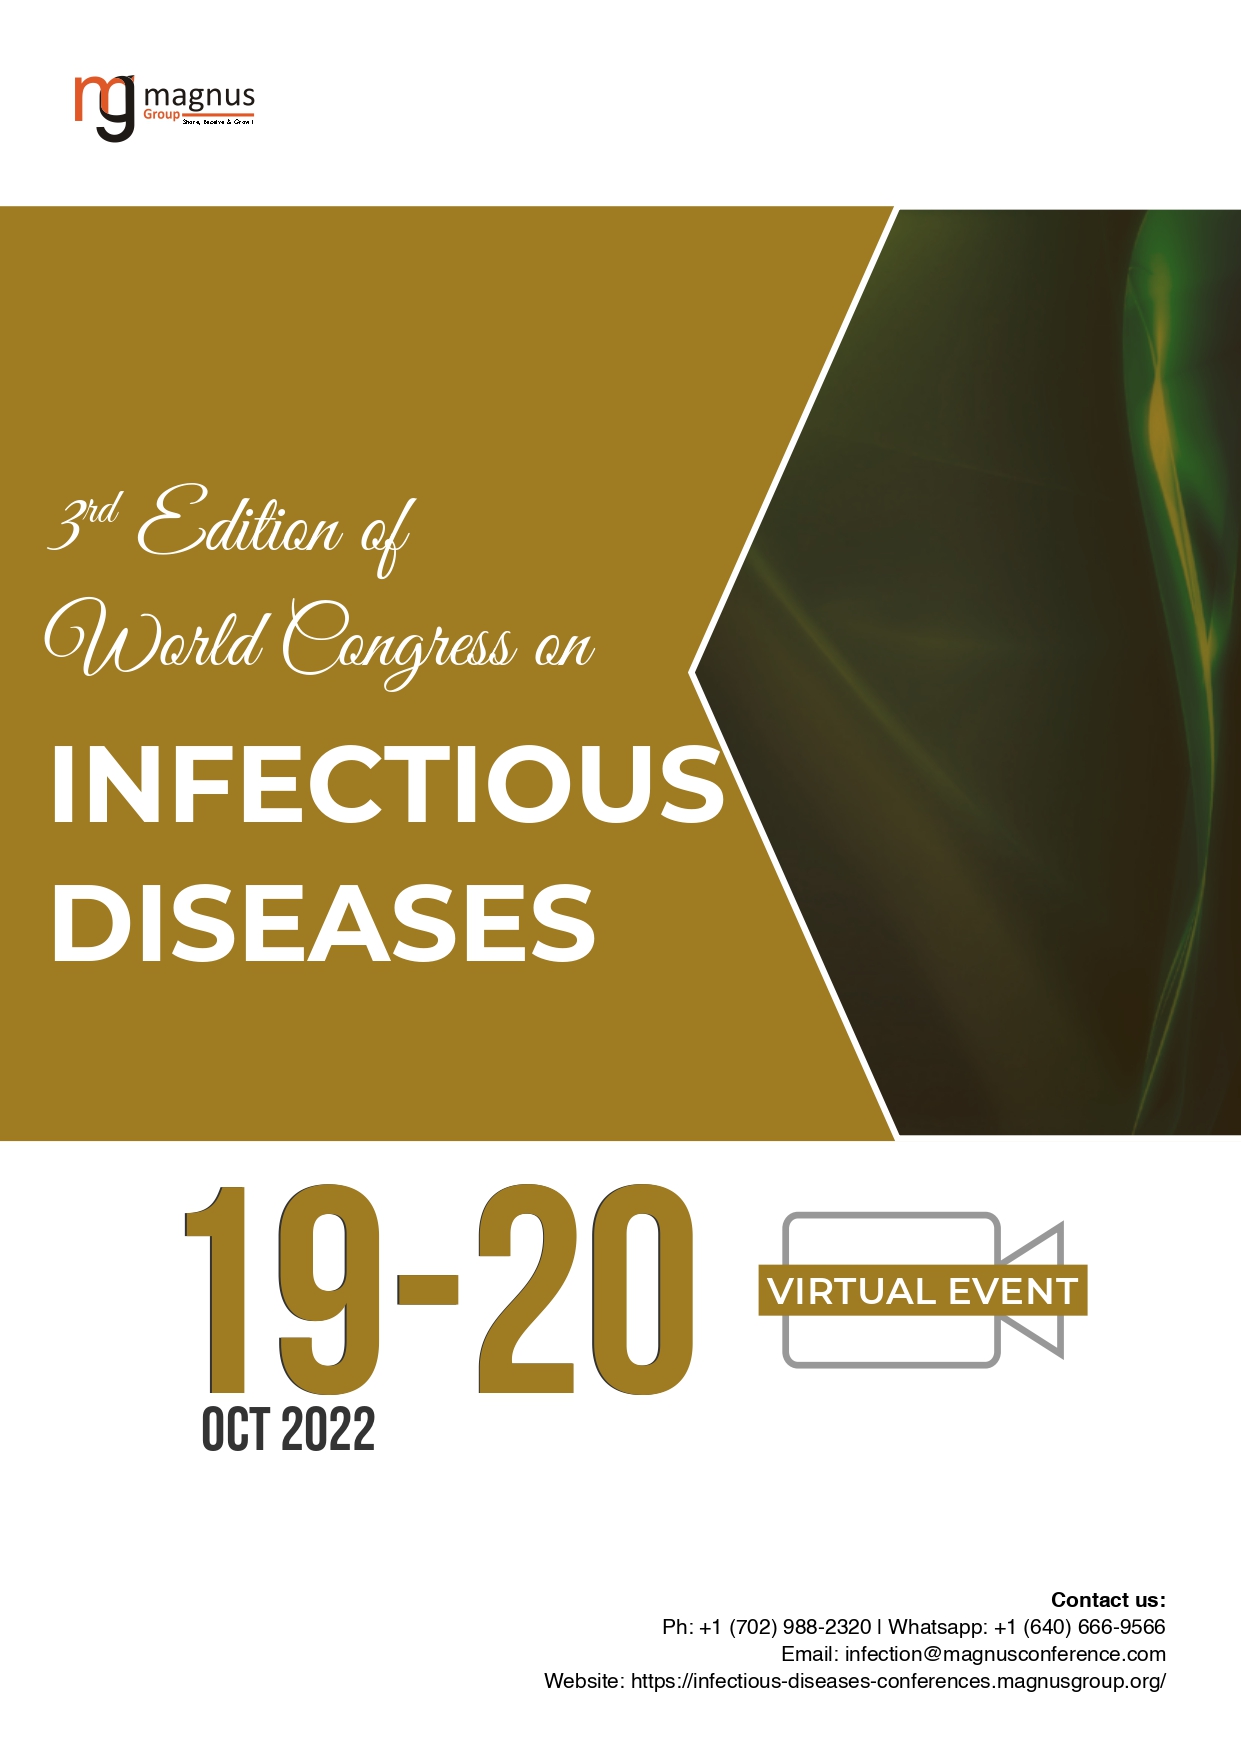 3rd Edition of World Congress on Infectious Diseases | Online Event Book